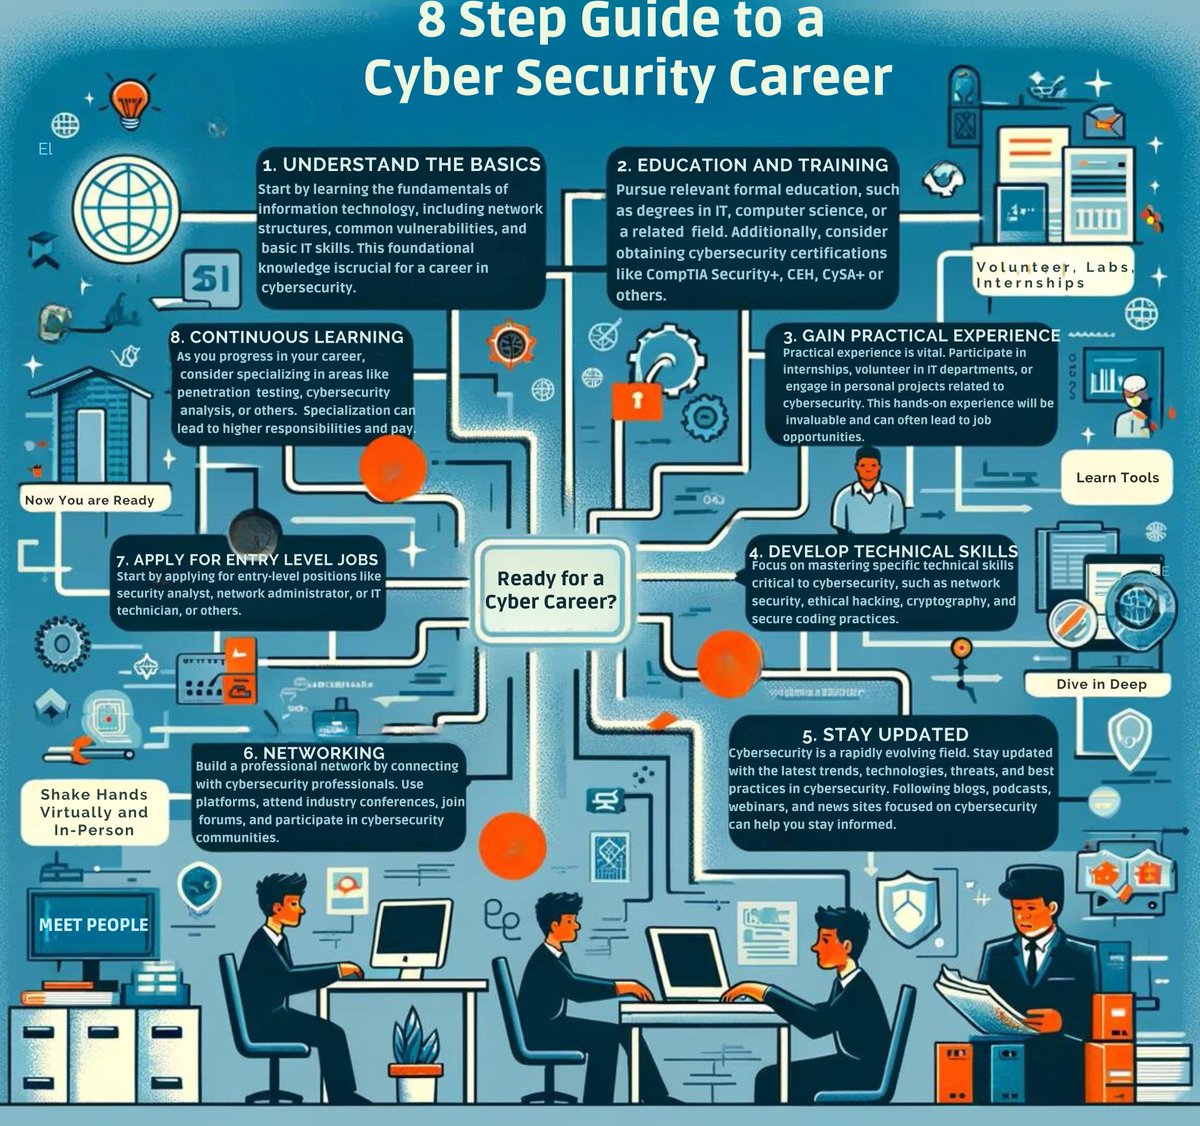 Here is an 8 Step Guide to Pursuing a Career in Cyber Security from Scratch. 1. Learn the Basics: Study essential skills (networking and basic IT skills) 2. Education and Training: Pursue relevant degrees and certifications like CompTIA Security+, Google Cert, or even CySA+.…